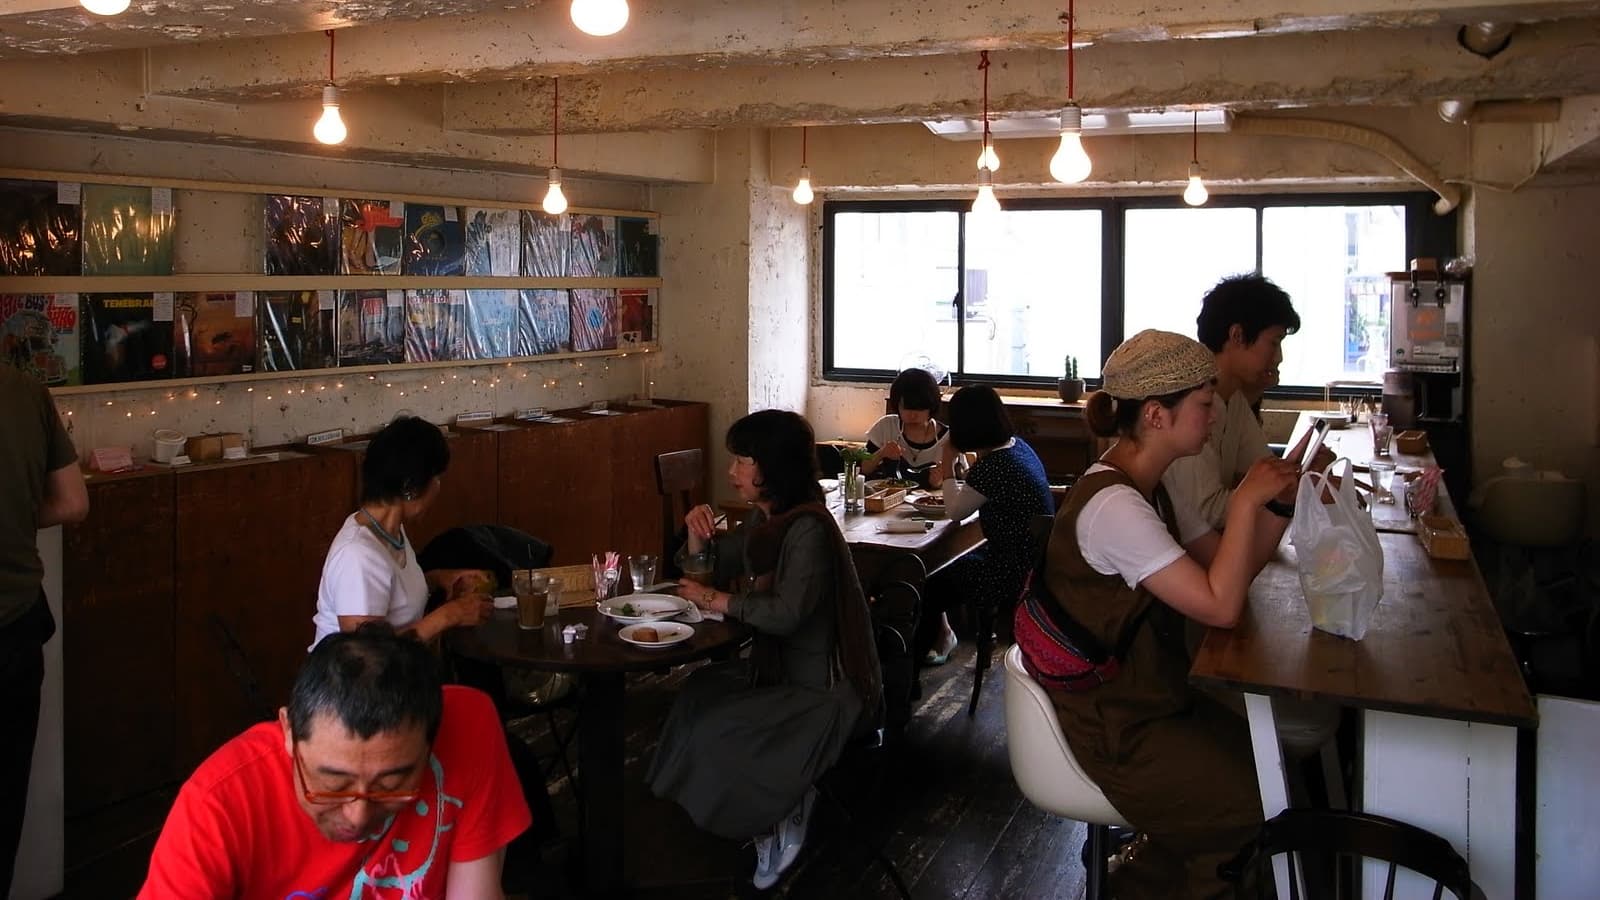 City Country City, a combination cafe and record store packed with vinyl and relaxing vibes.